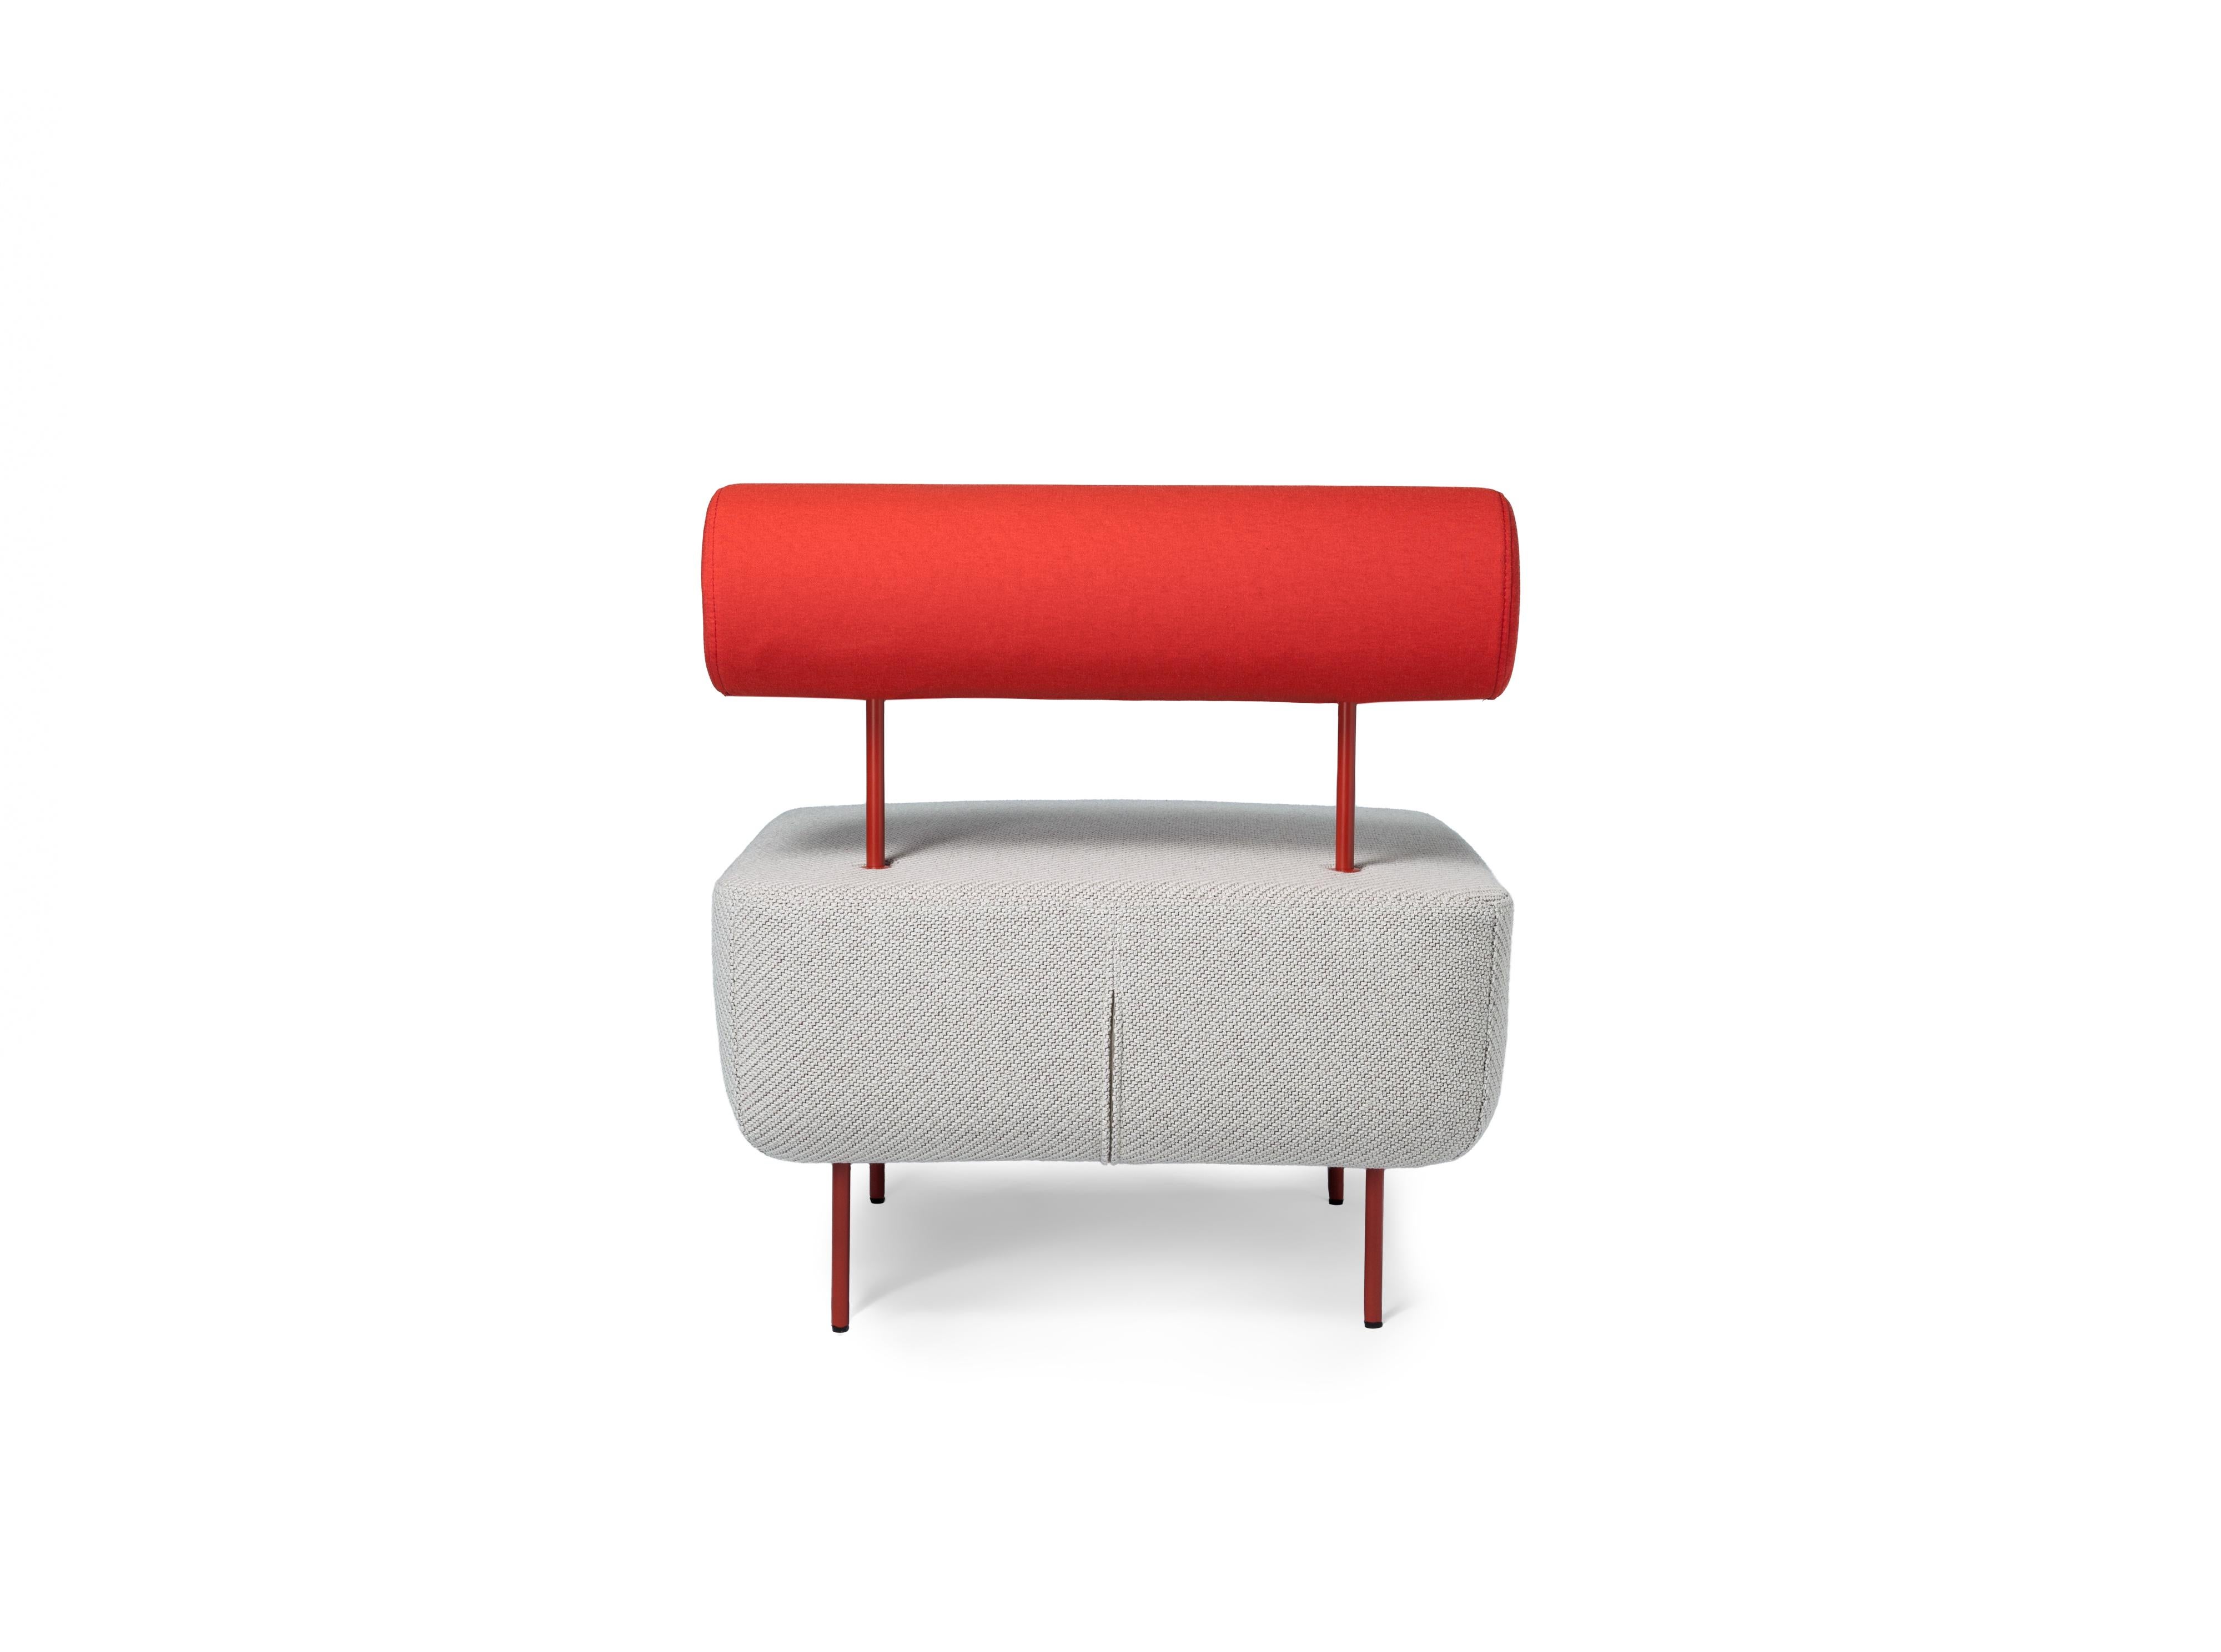 Petite Friture Medium Hoff Armchair in White and Red by Morten & Jonas, 2015 In New Condition For Sale In Brooklyn, NY